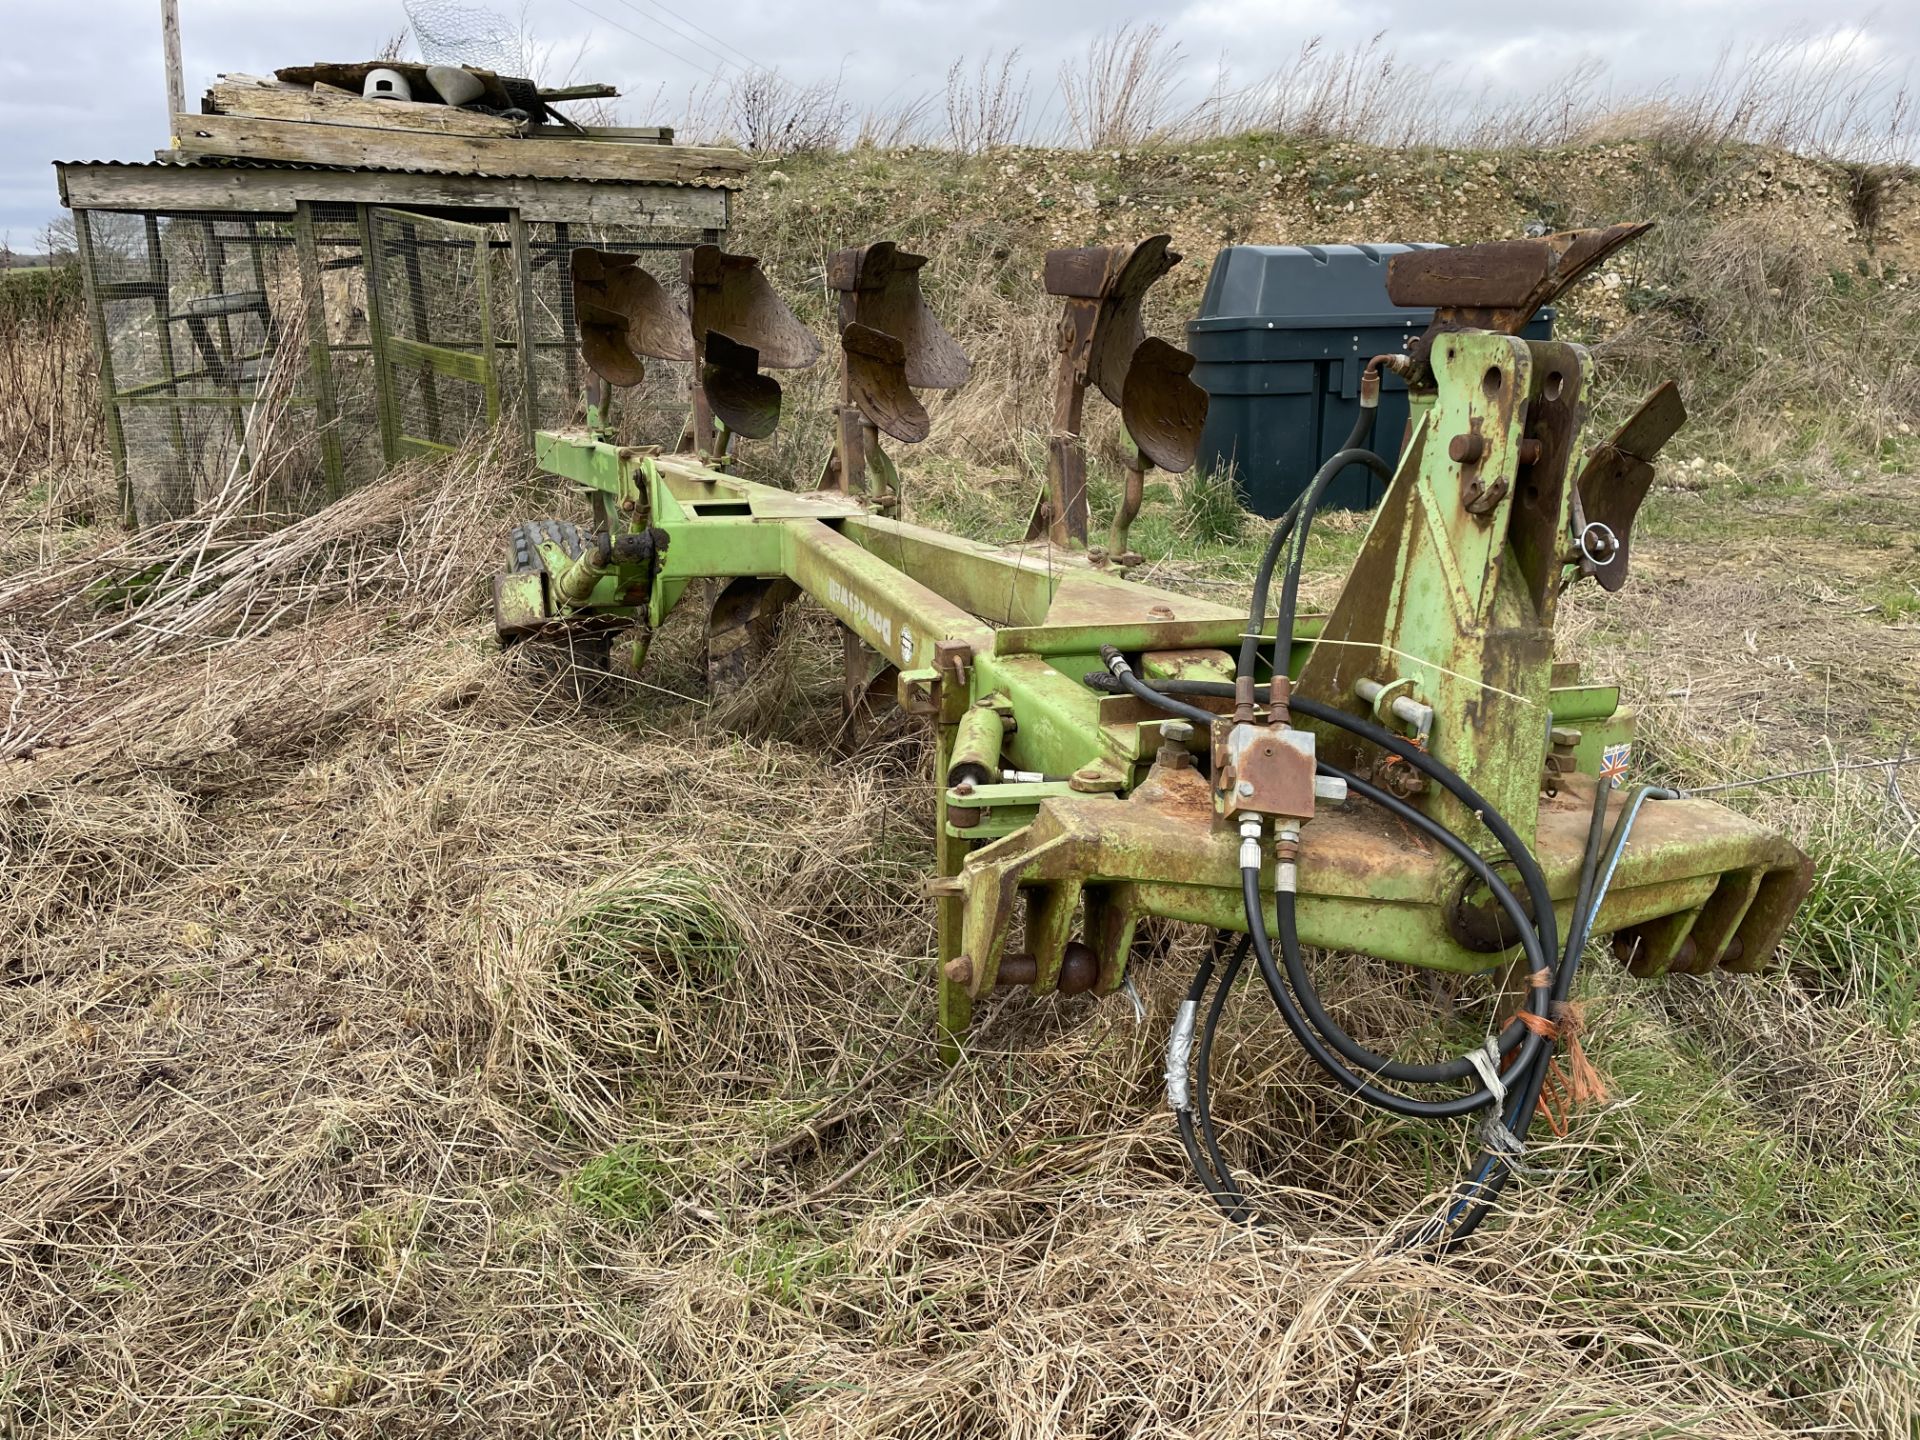 1991 Dowdswell DP7D/2 4 plus 1 5 furrow reversible plough, owned from new - Subject to VAT - Image 2 of 2